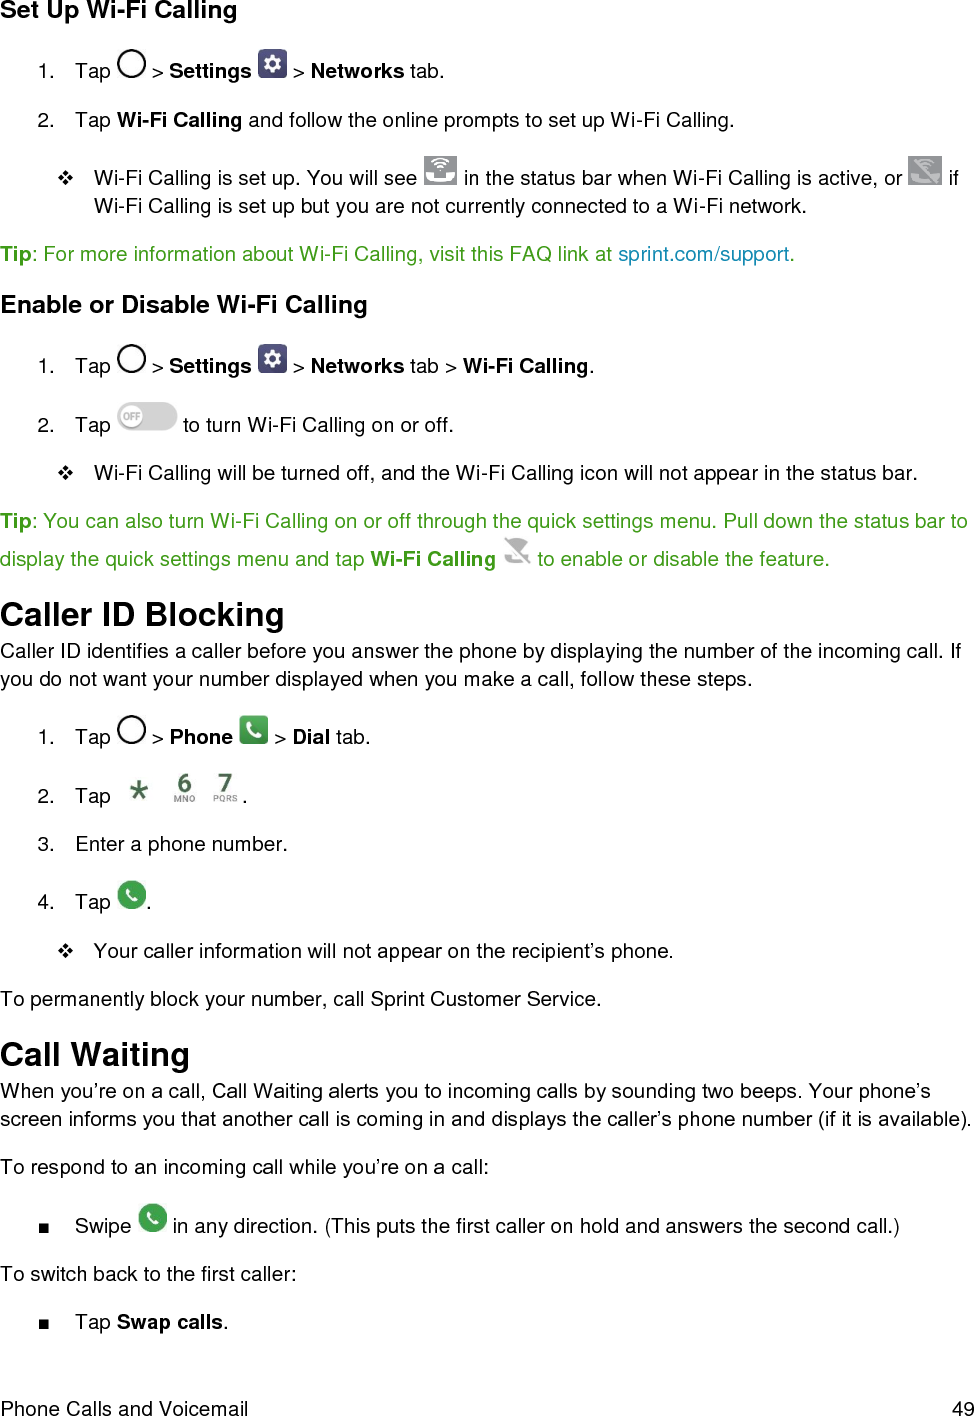  Phone Calls and Voicemail  49 Set Up Wi-Fi Calling 1.  Tap   &gt; Settings   &gt; Networks tab. 2.  Tap Wi-Fi Calling and follow the online prompts to set up Wi-Fi Calling.  Wi-Fi Calling is set up. You will see   in the status bar when Wi-Fi Calling is active, or   if Wi-Fi Calling is set up but you are not currently connected to a Wi-Fi network. Tip: For more information about Wi-Fi Calling, visit this FAQ link at sprint.com/support. Enable or Disable Wi-Fi Calling 1.  Tap   &gt; Settings   &gt; Networks tab &gt; Wi-Fi Calling. 2.  Tap   to turn Wi-Fi Calling on or off.   Wi-Fi Calling will be turned off, and the Wi-Fi Calling icon will not appear in the status bar. Tip: You can also turn Wi-Fi Calling on or off through the quick settings menu. Pull down the status bar to display the quick settings menu and tap Wi-Fi Calling   to enable or disable the feature. Caller ID Blocking Caller ID identifies a caller before you answer the phone by displaying the number of the incoming call. If you do not want your number displayed when you make a call, follow these steps. 1.  Tap   &gt; Phone   &gt; Dial tab. 2.  Tap      . 3.  Enter a phone number. 4.  Tap  .  Your caller information will not appear on the recipient’s phone. To permanently block your number, call Sprint Customer Service. Call Waiting When you’re on a call, Call Waiting alerts you to incoming calls by sounding two beeps. Your phone’s screen informs you that another call is coming in and displays the caller’s phone number (if it is available). To respond to an incoming call while you’re on a call: ■  Swipe   in any direction. (This puts the first caller on hold and answers the second call.) To switch back to the first caller: ■  Tap Swap calls. 